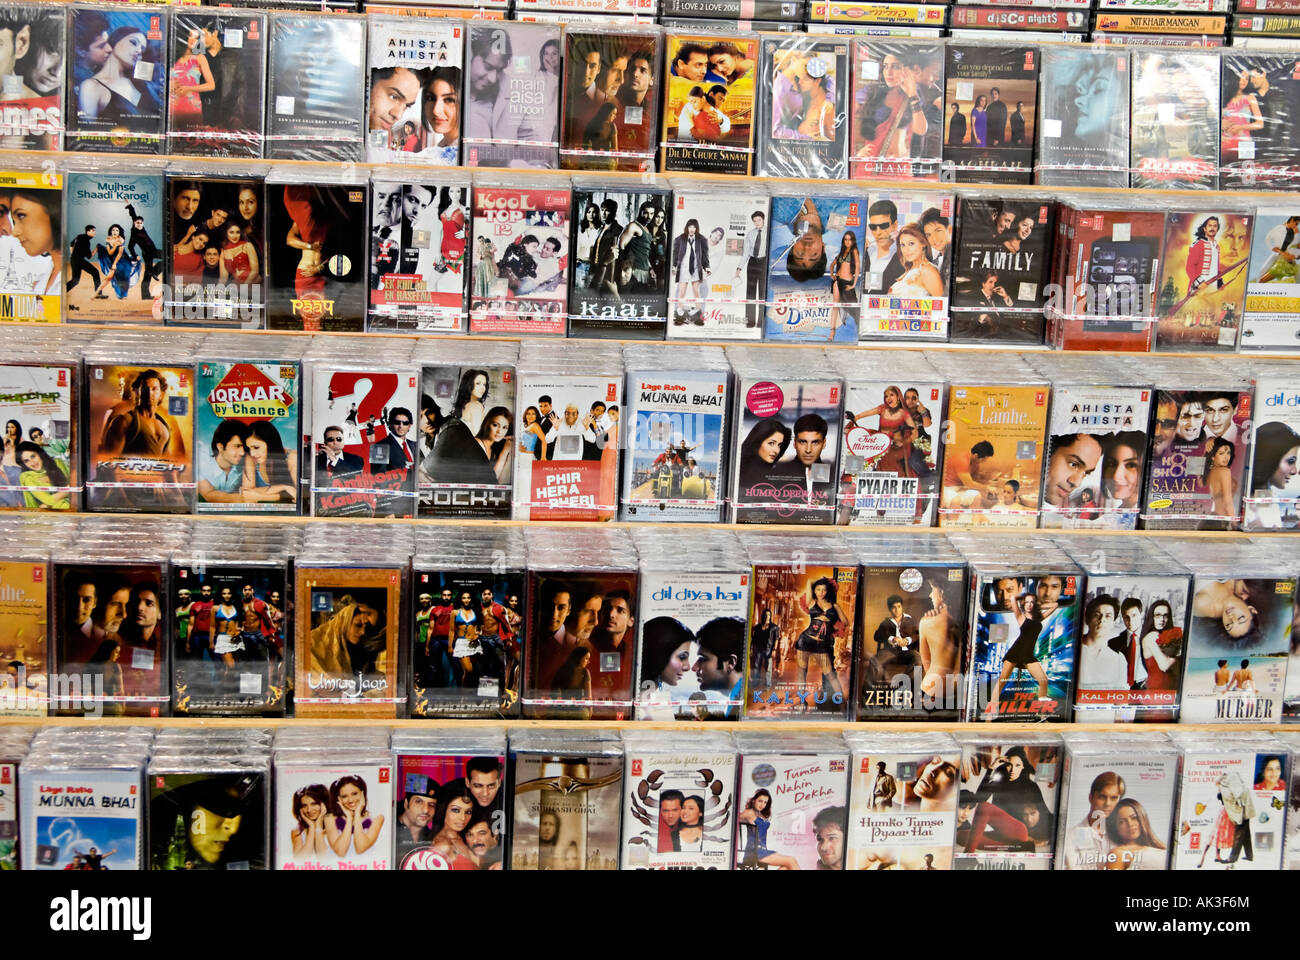 rows of asian music on tape and cd lined up in the traditional style often found in most asian music retailers in the uk Stock Photo